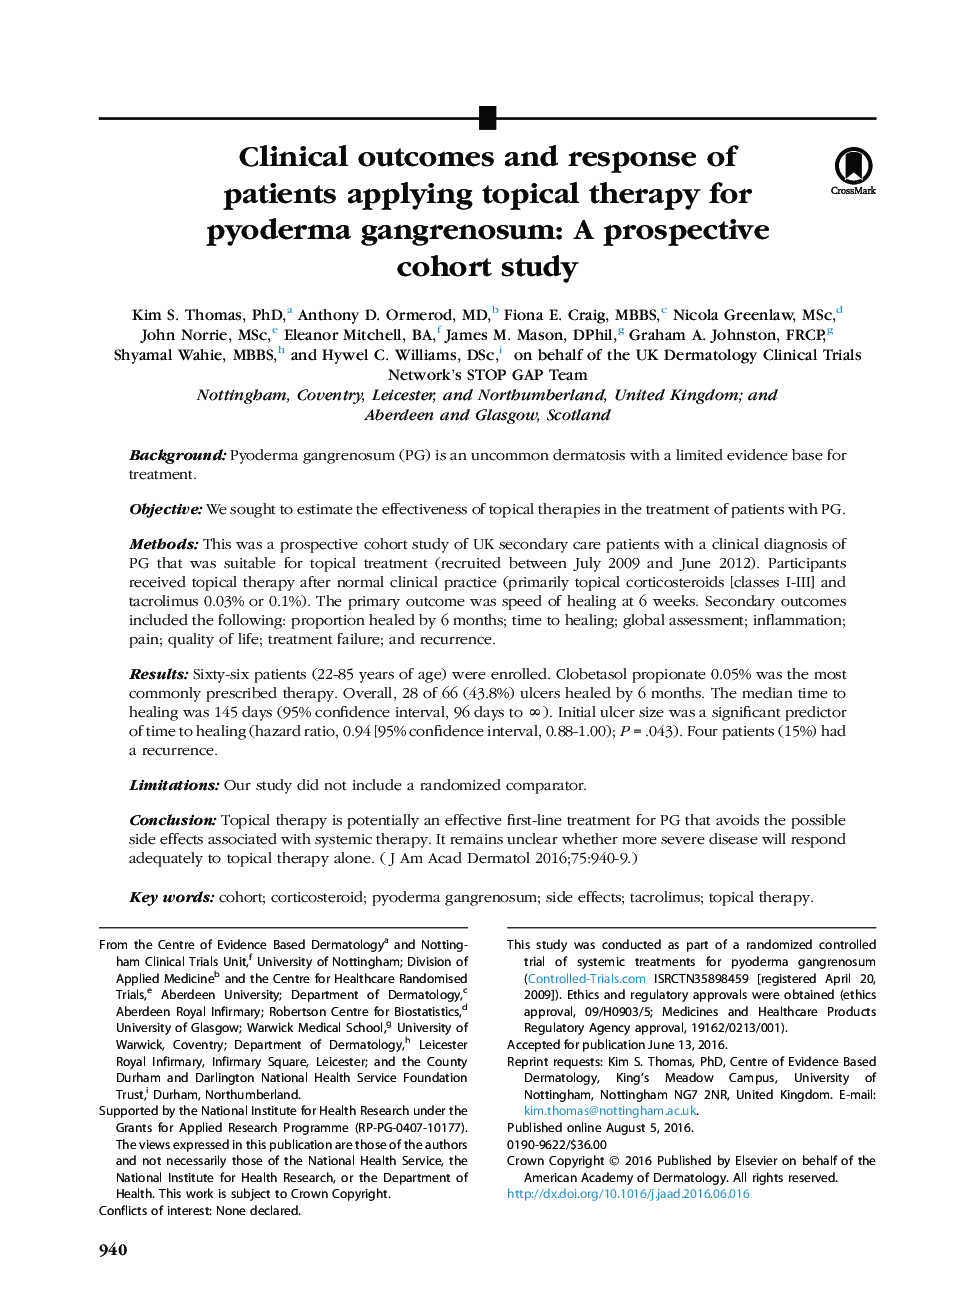 Clinical outcomes and response of patients applying topical therapy for pyoderma gangrenosum: A prospective cohort study